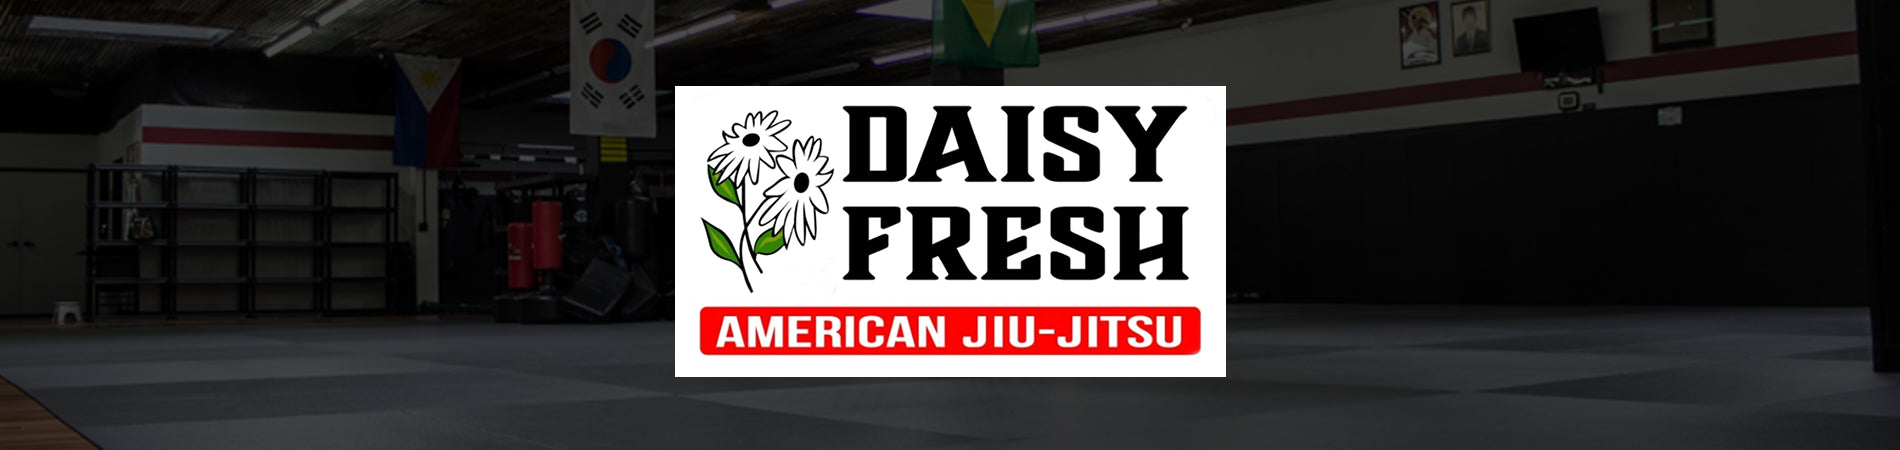 What You Need To Know About Daisy Fresh BJJ